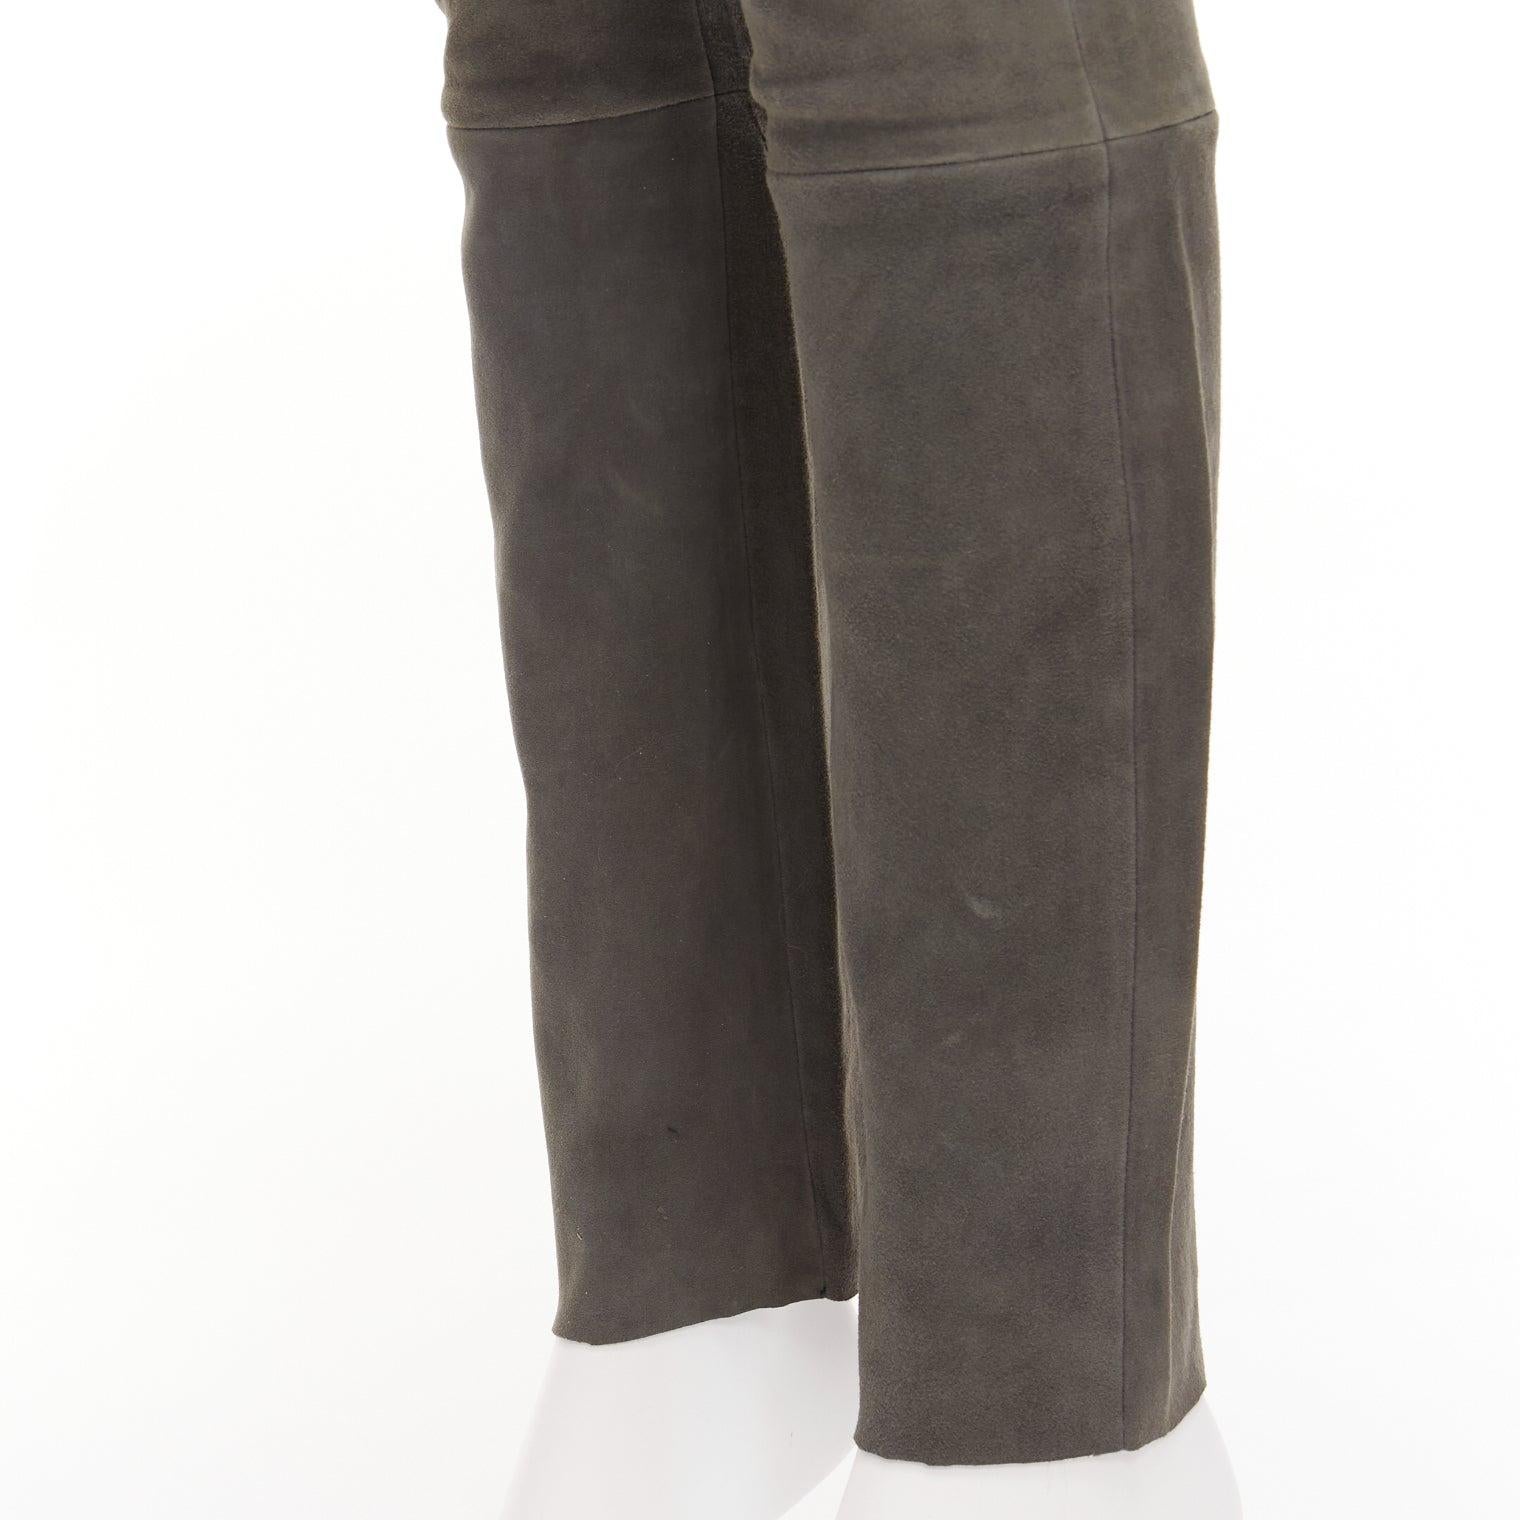 HAIDER ACKERMANN green grey suede leather flared legging pants FR36 S
Reference: CNPG/A00054
Brand: Haider Ackermann
Material: Suede
Color: Grey
Pattern: Solid
Closure: Elasticated
Lining: Green Fabric
Extra Details: Elasticated waistband and